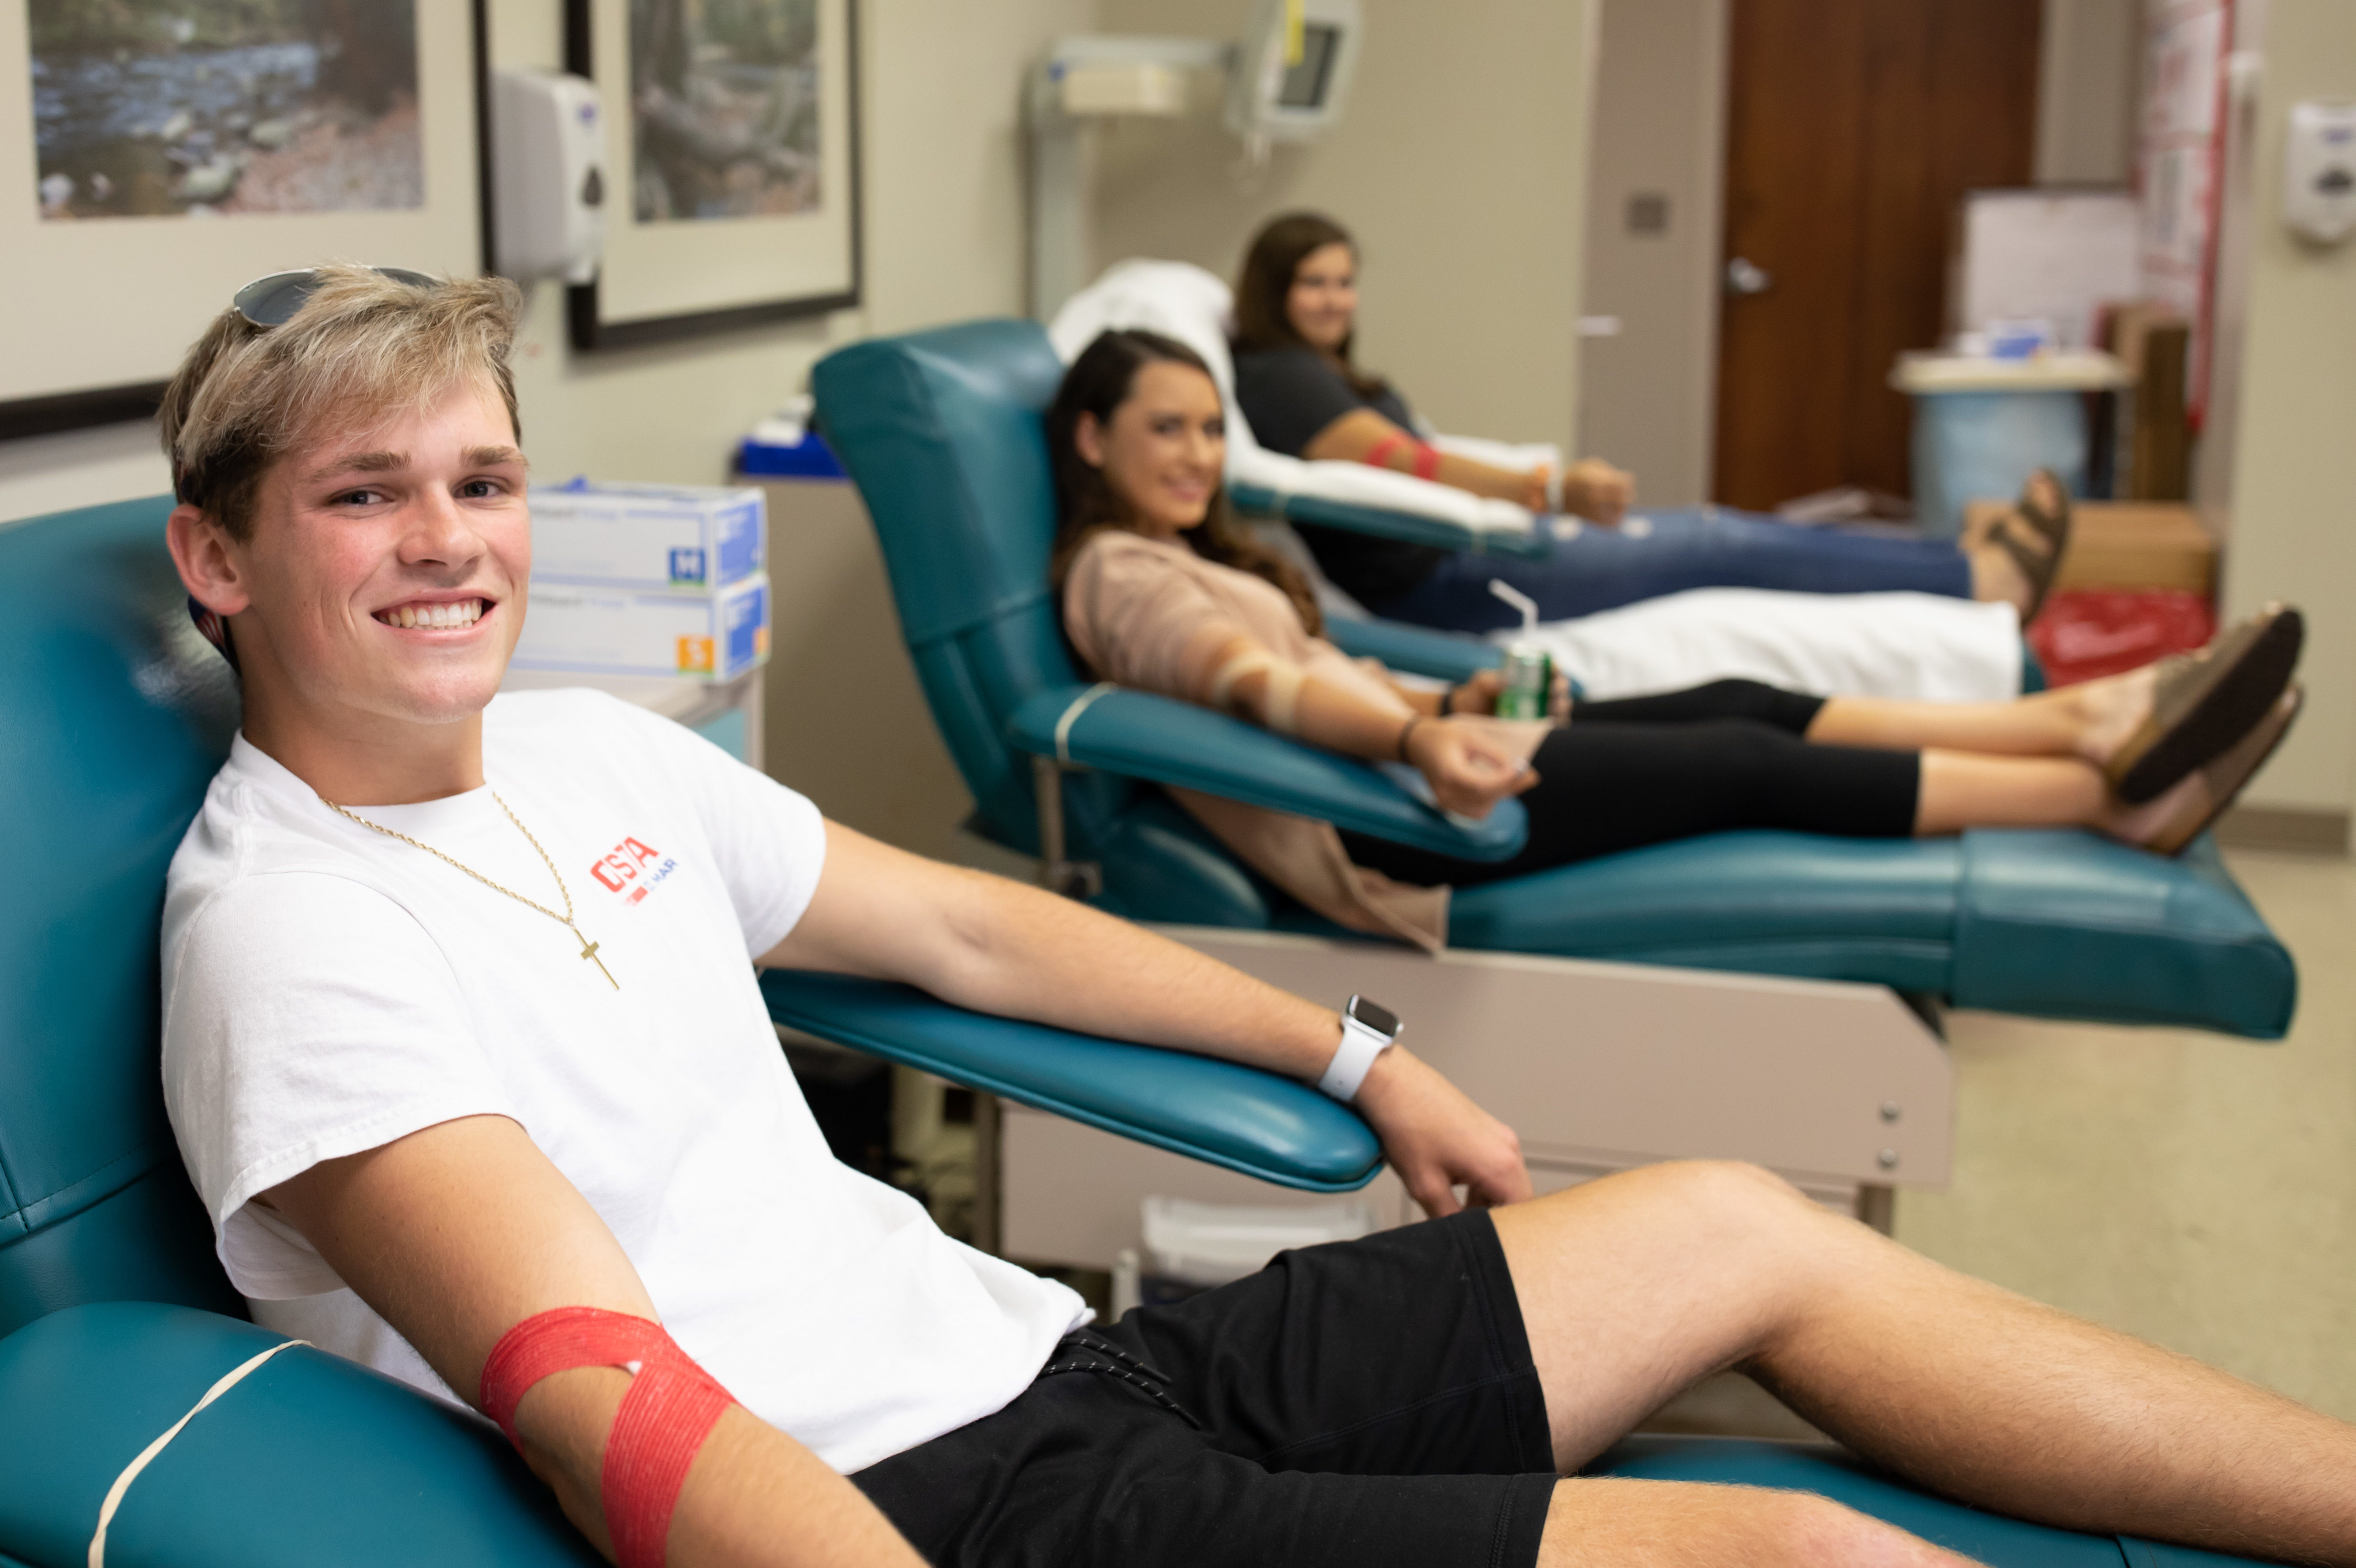 3 high school student donors in chairs after donating